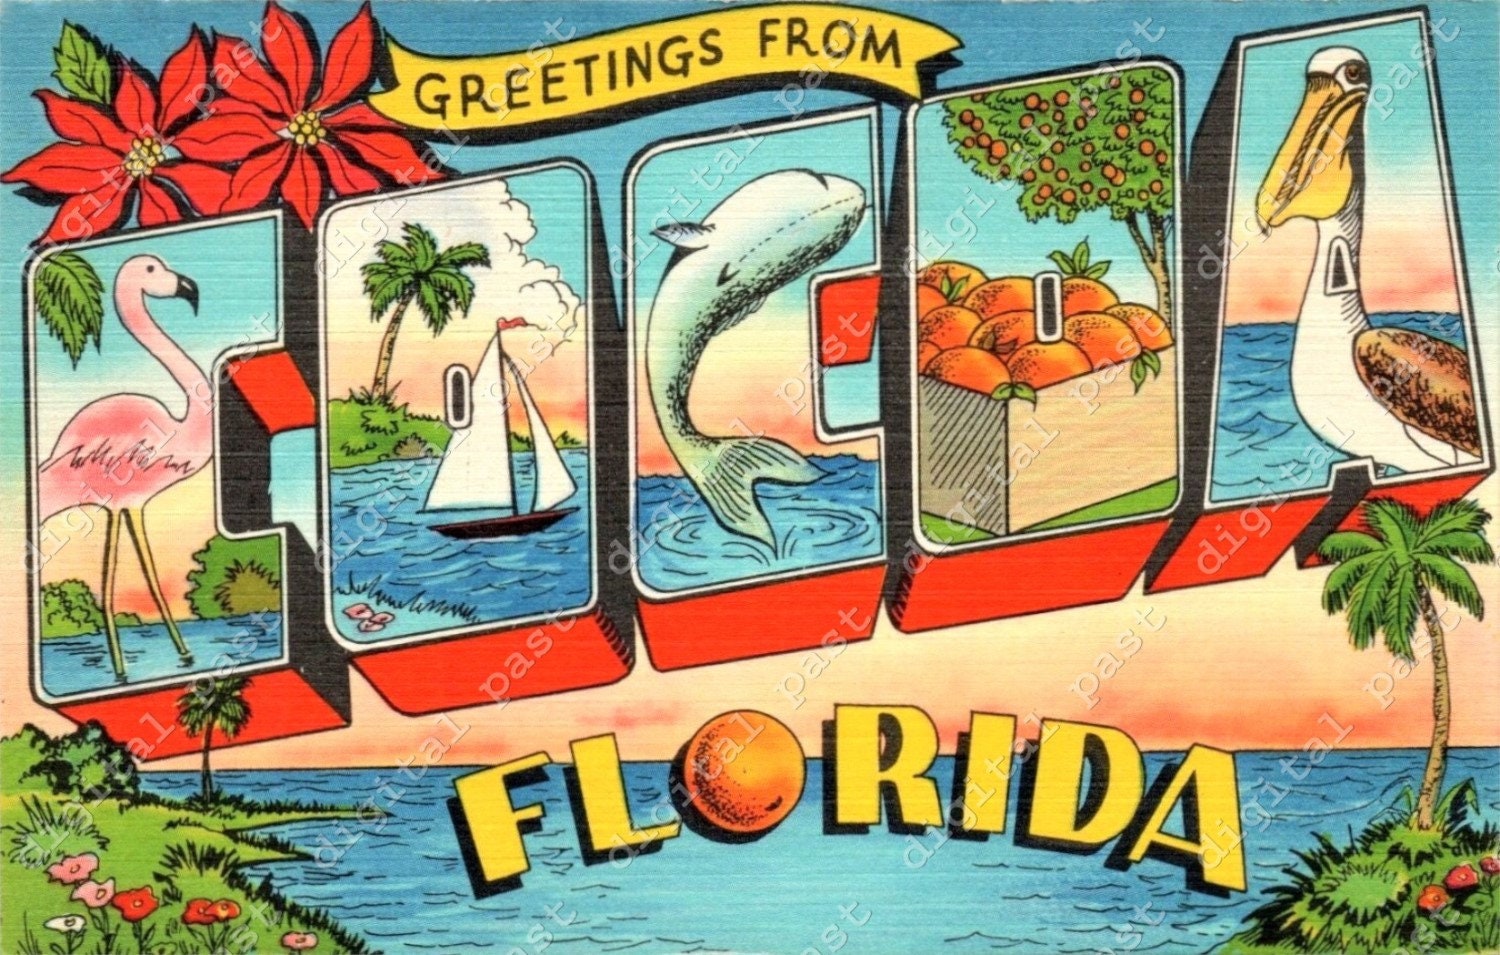 Greetings From COCOA Florida Postcard Image DIGITAL DOWNLOAD